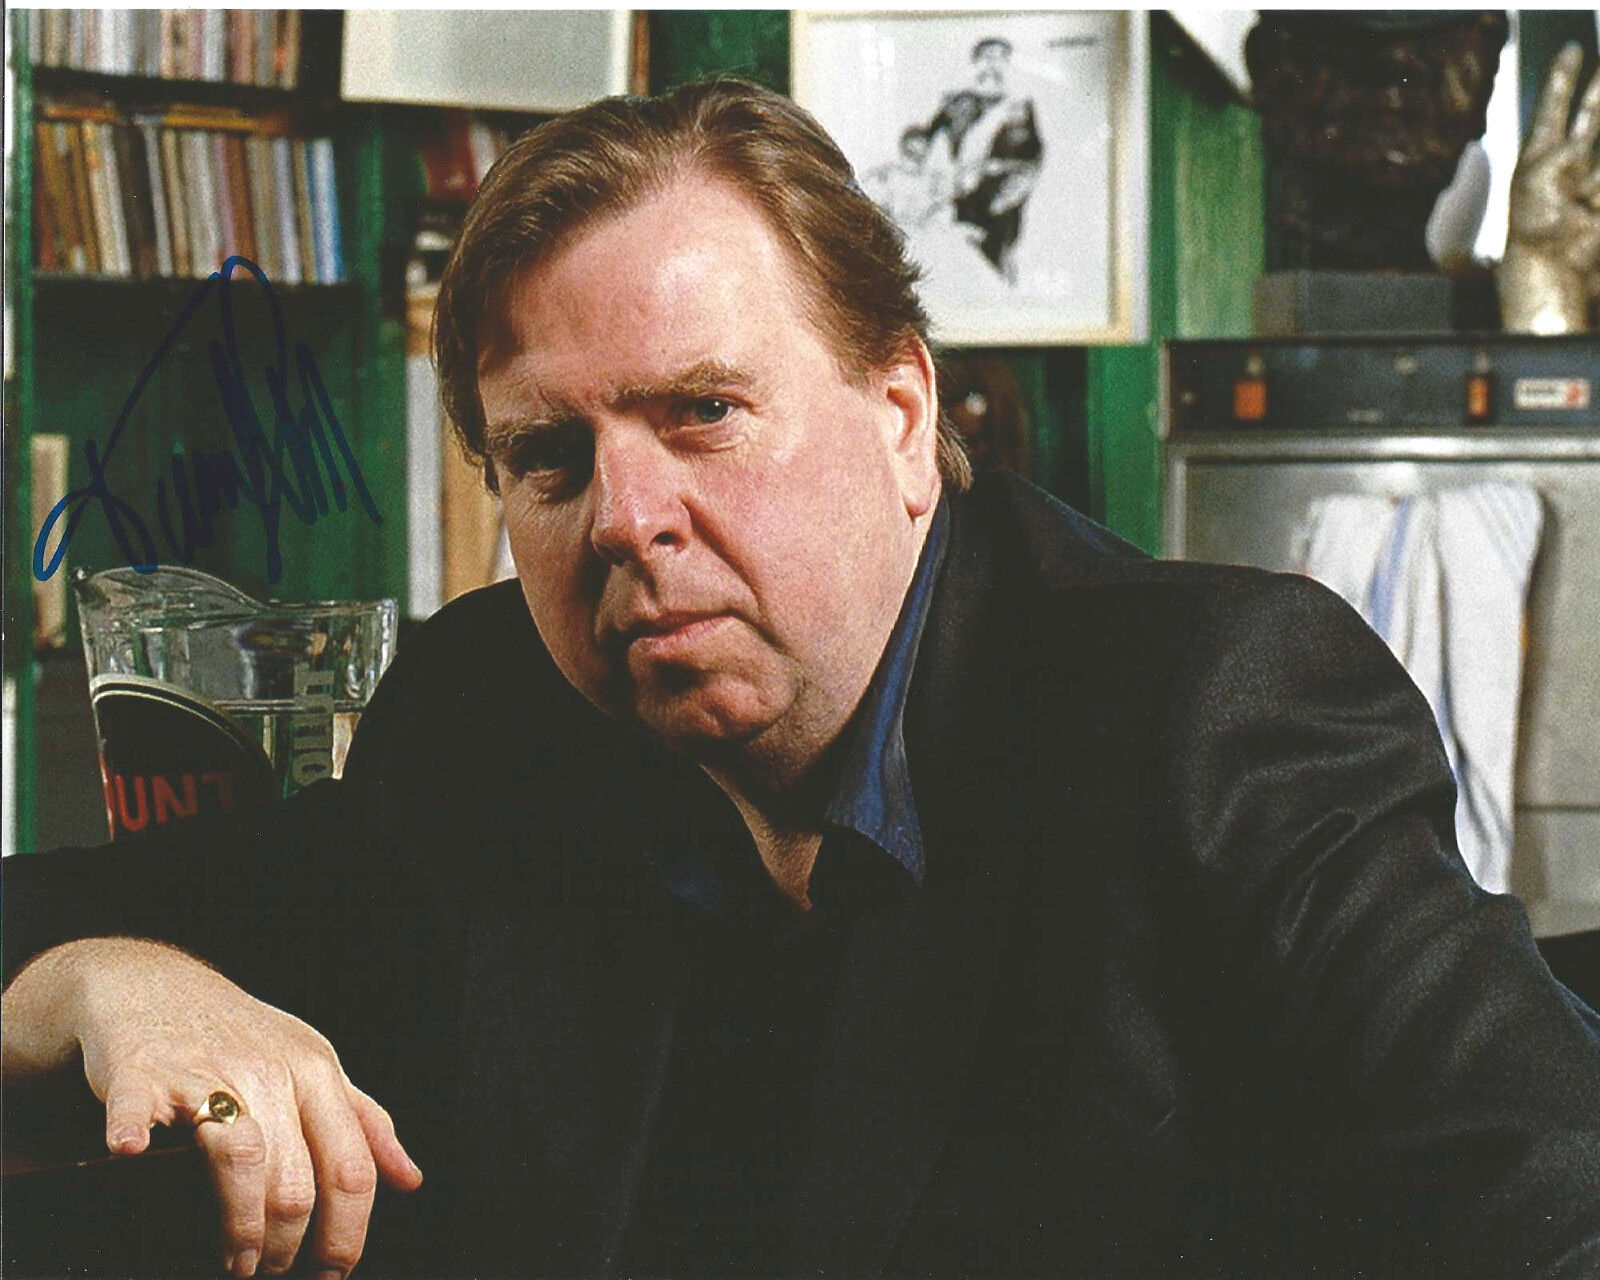 TIMOTHY SPALL SIGNED HARRY POTTER GOBLET OF FIRE 8X10 Photo Poster painting COA PROOF MR. TURNER